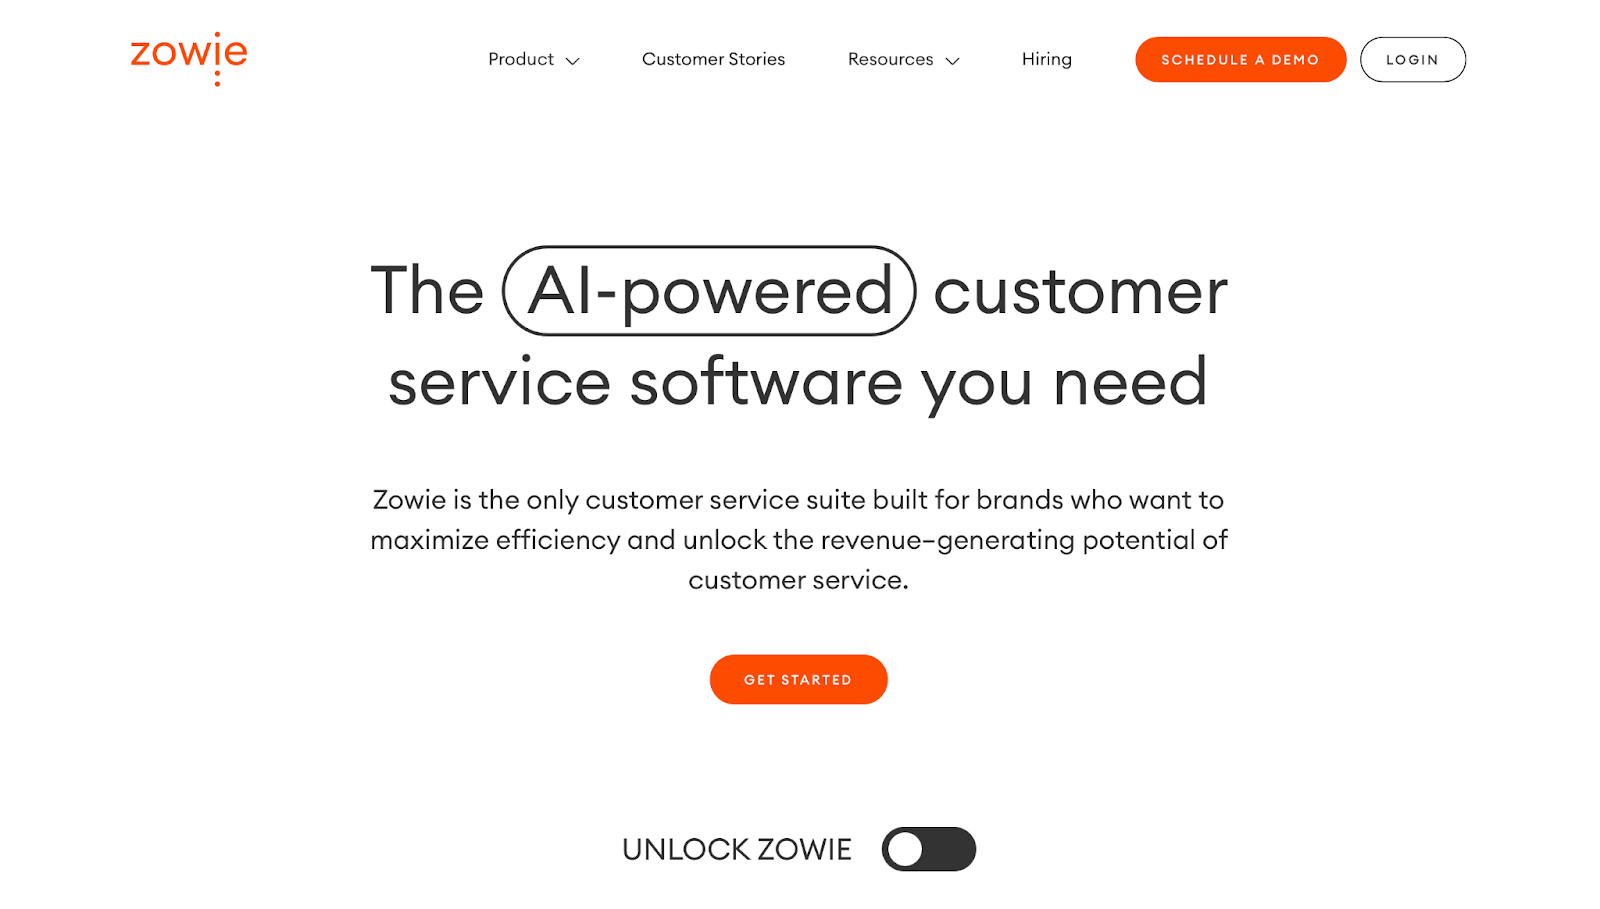 chatbot tools: zowie